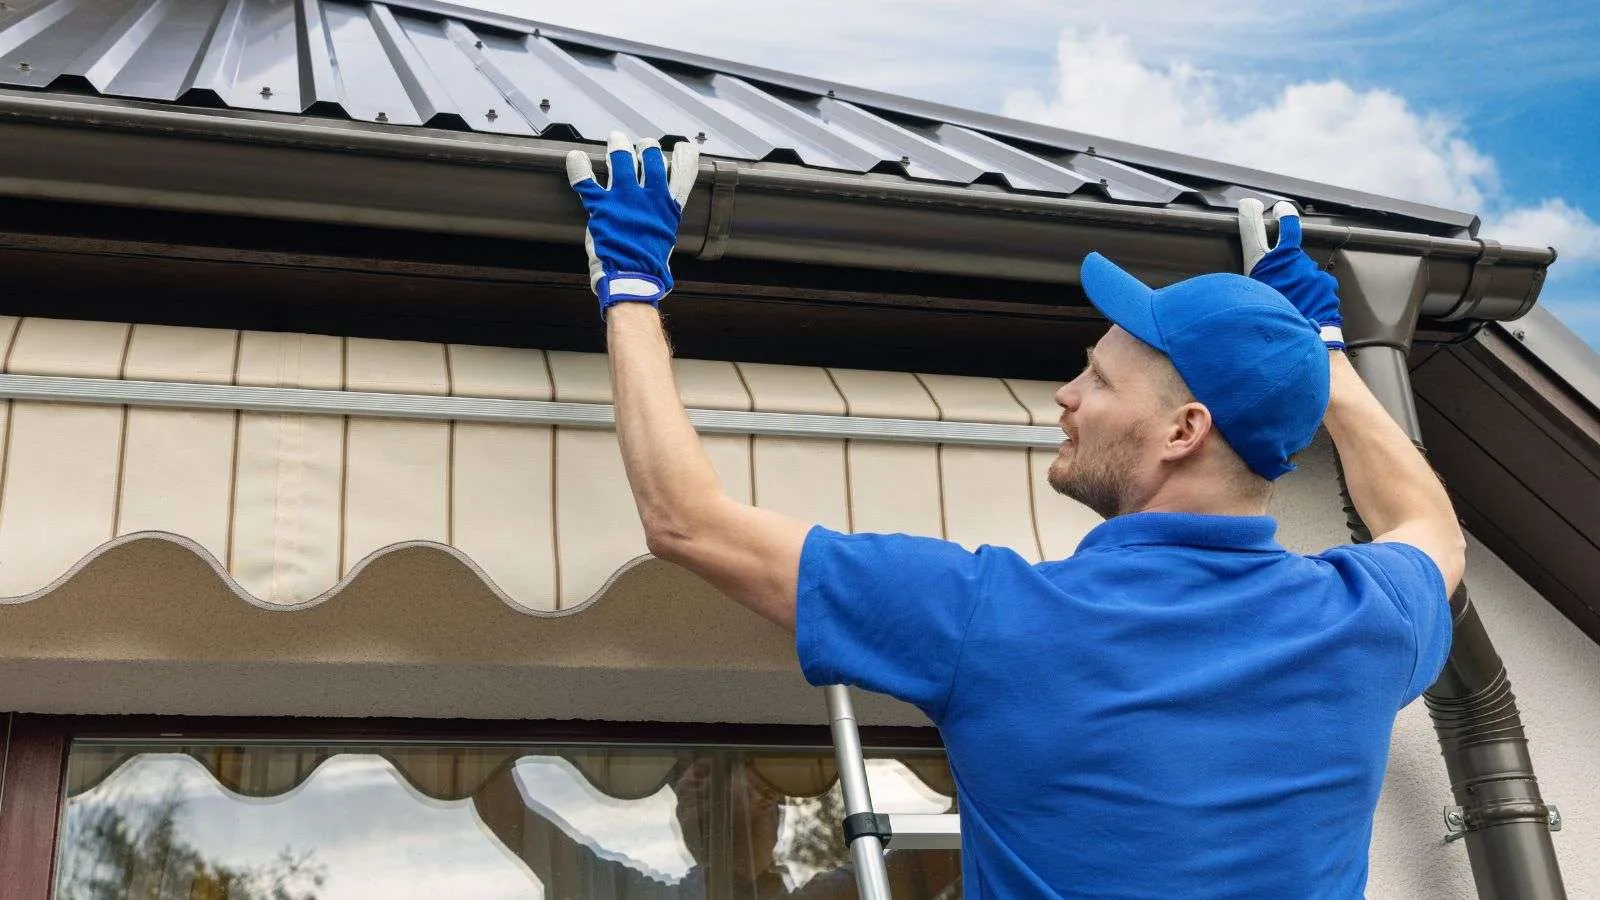 self-adhering roofing systems worth it - bighomeprojects.com